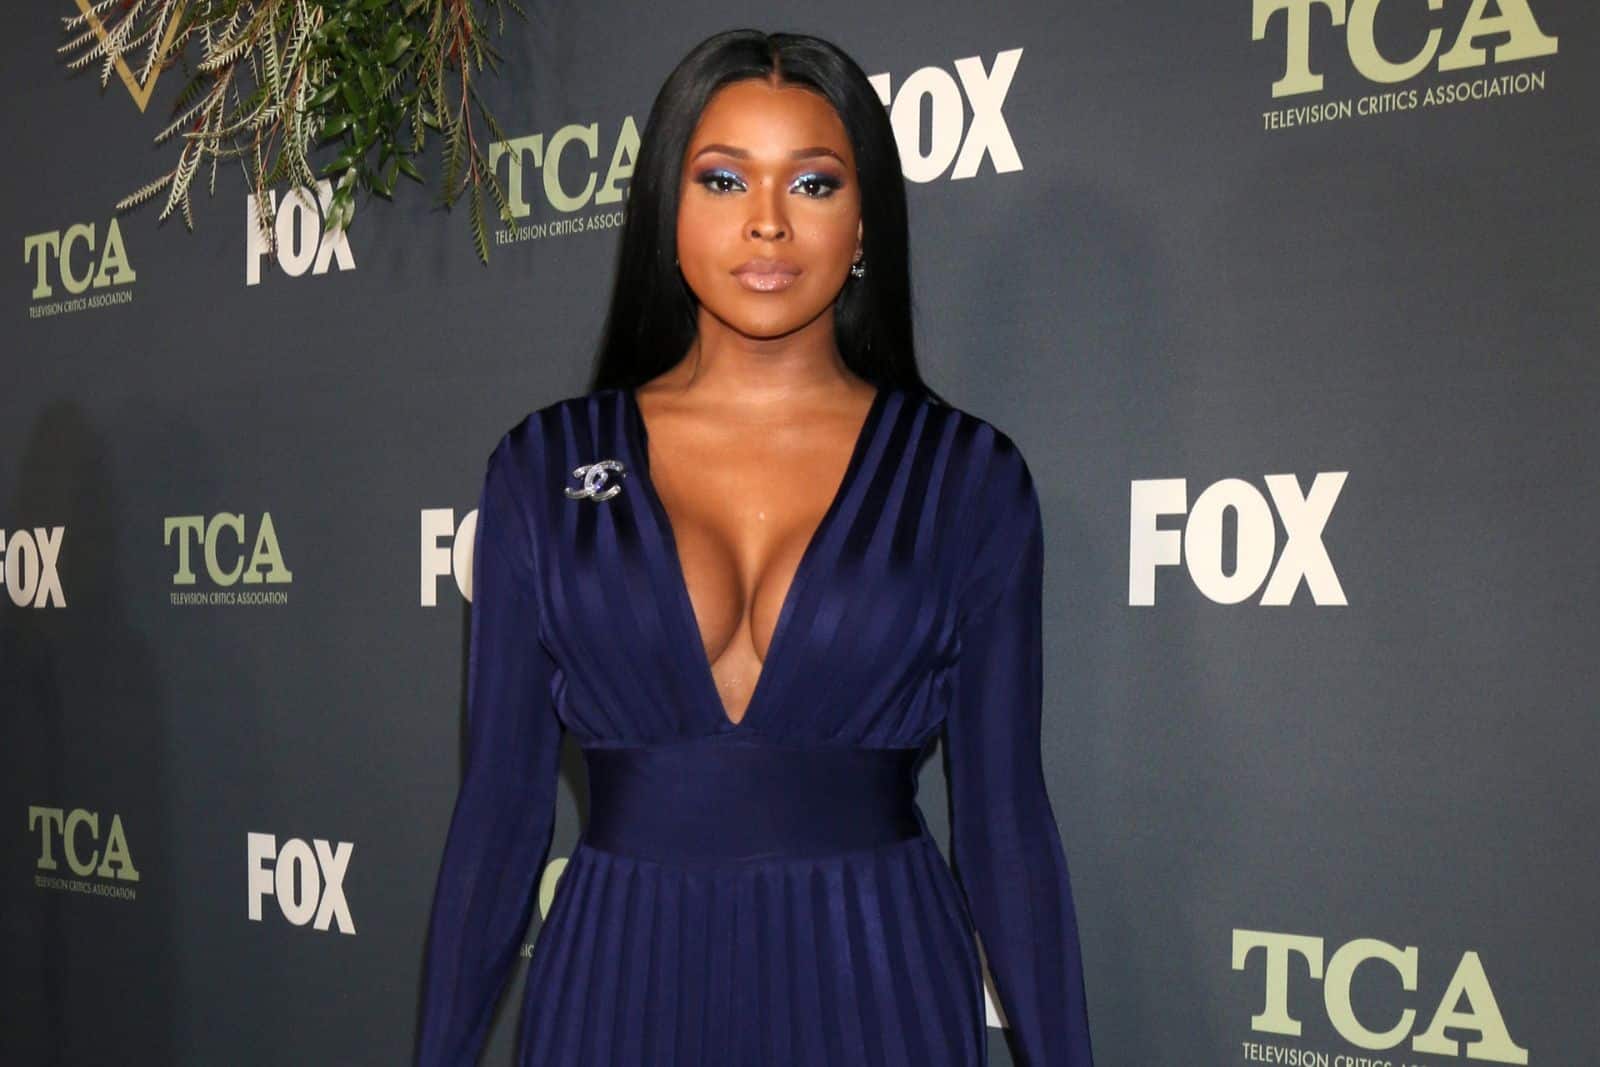 <p class="wp-caption-text">Image Credit: Shutterstock / Kathy Hutchins</p>  <p><span>Amiyah Scott made history as the first transgender woman to star in “Real Housewives of Atlanta” and “Star.” Scott’s journey has been met with both acclaim and adversity, highlighting the challenges and triumphs of being a transgender actress in today’s media landscape.</span></p>